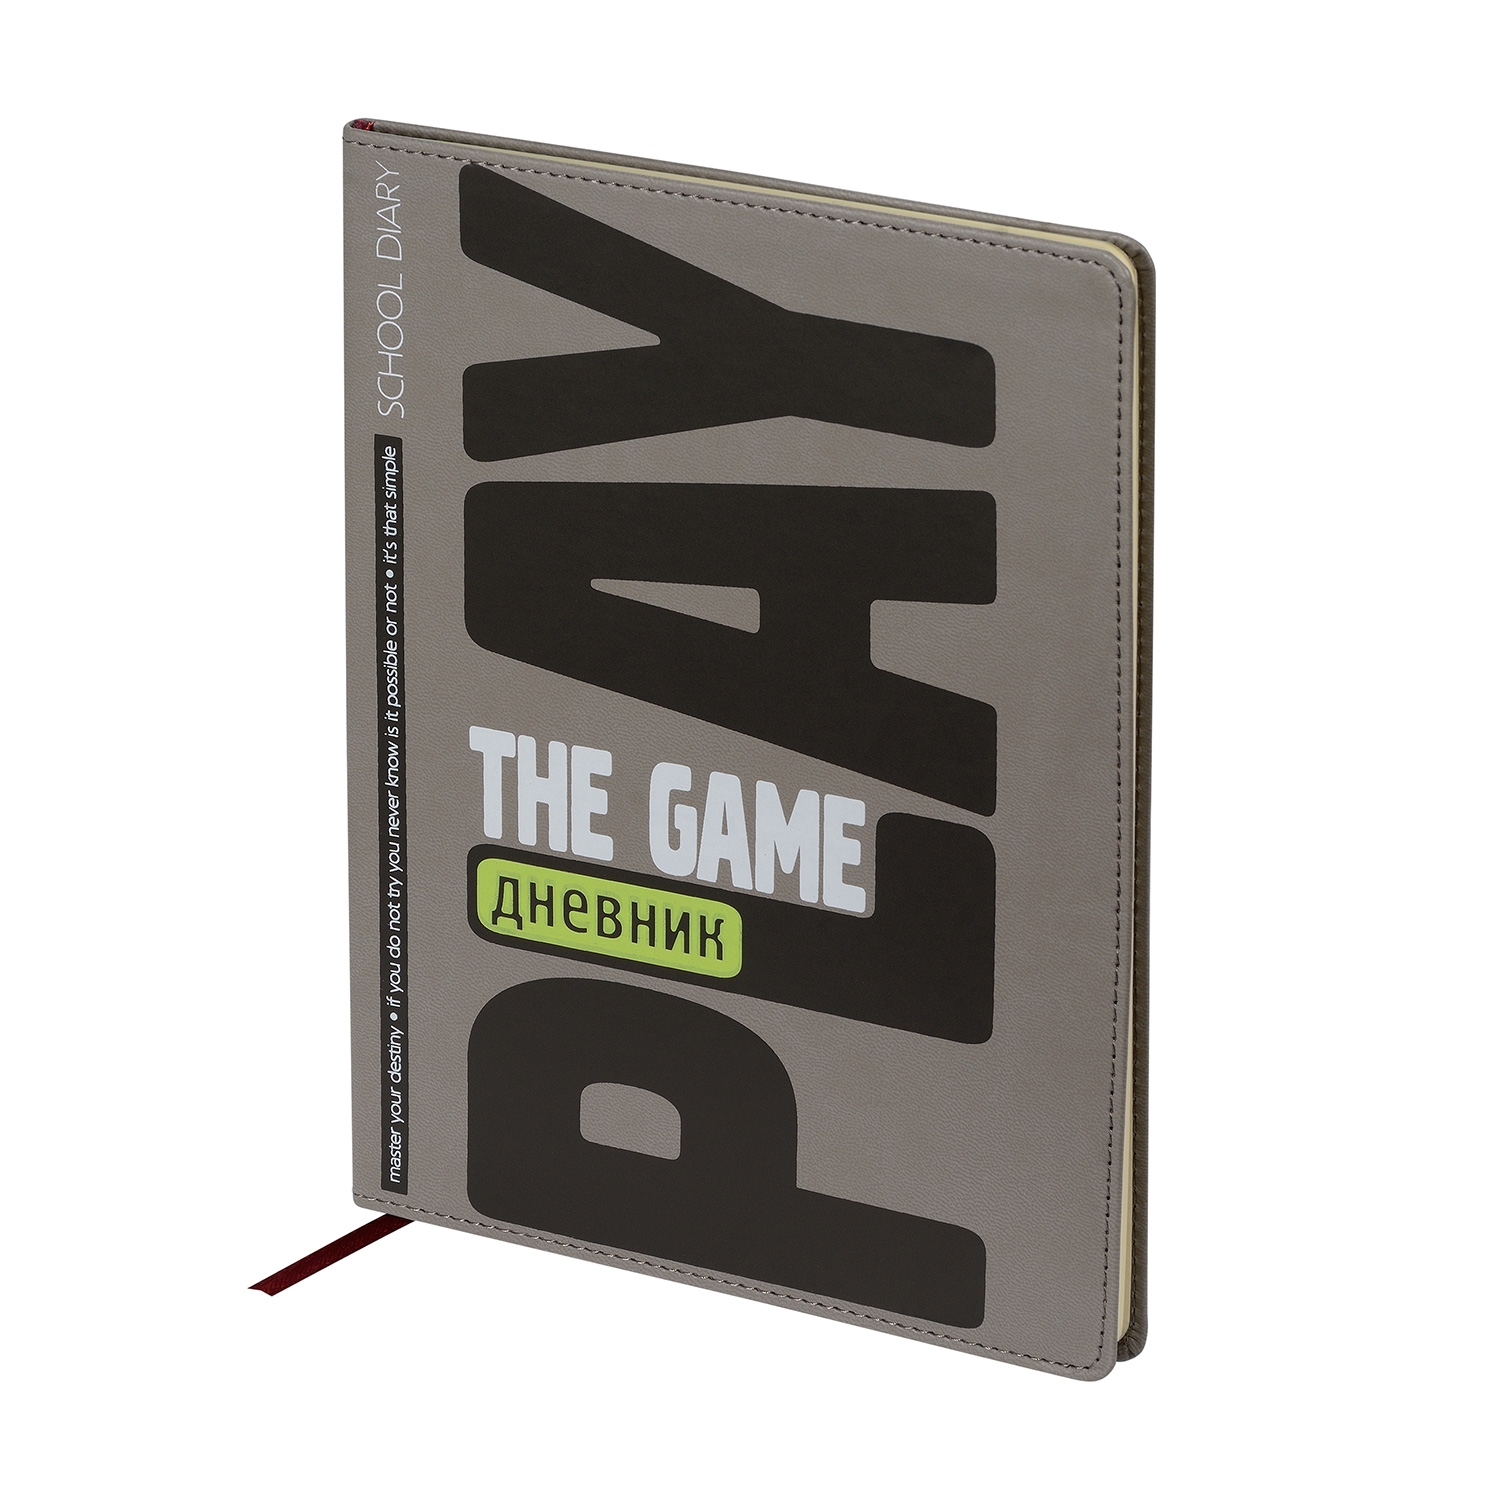 ДНЕВНИК "Play the Game" (48 л)